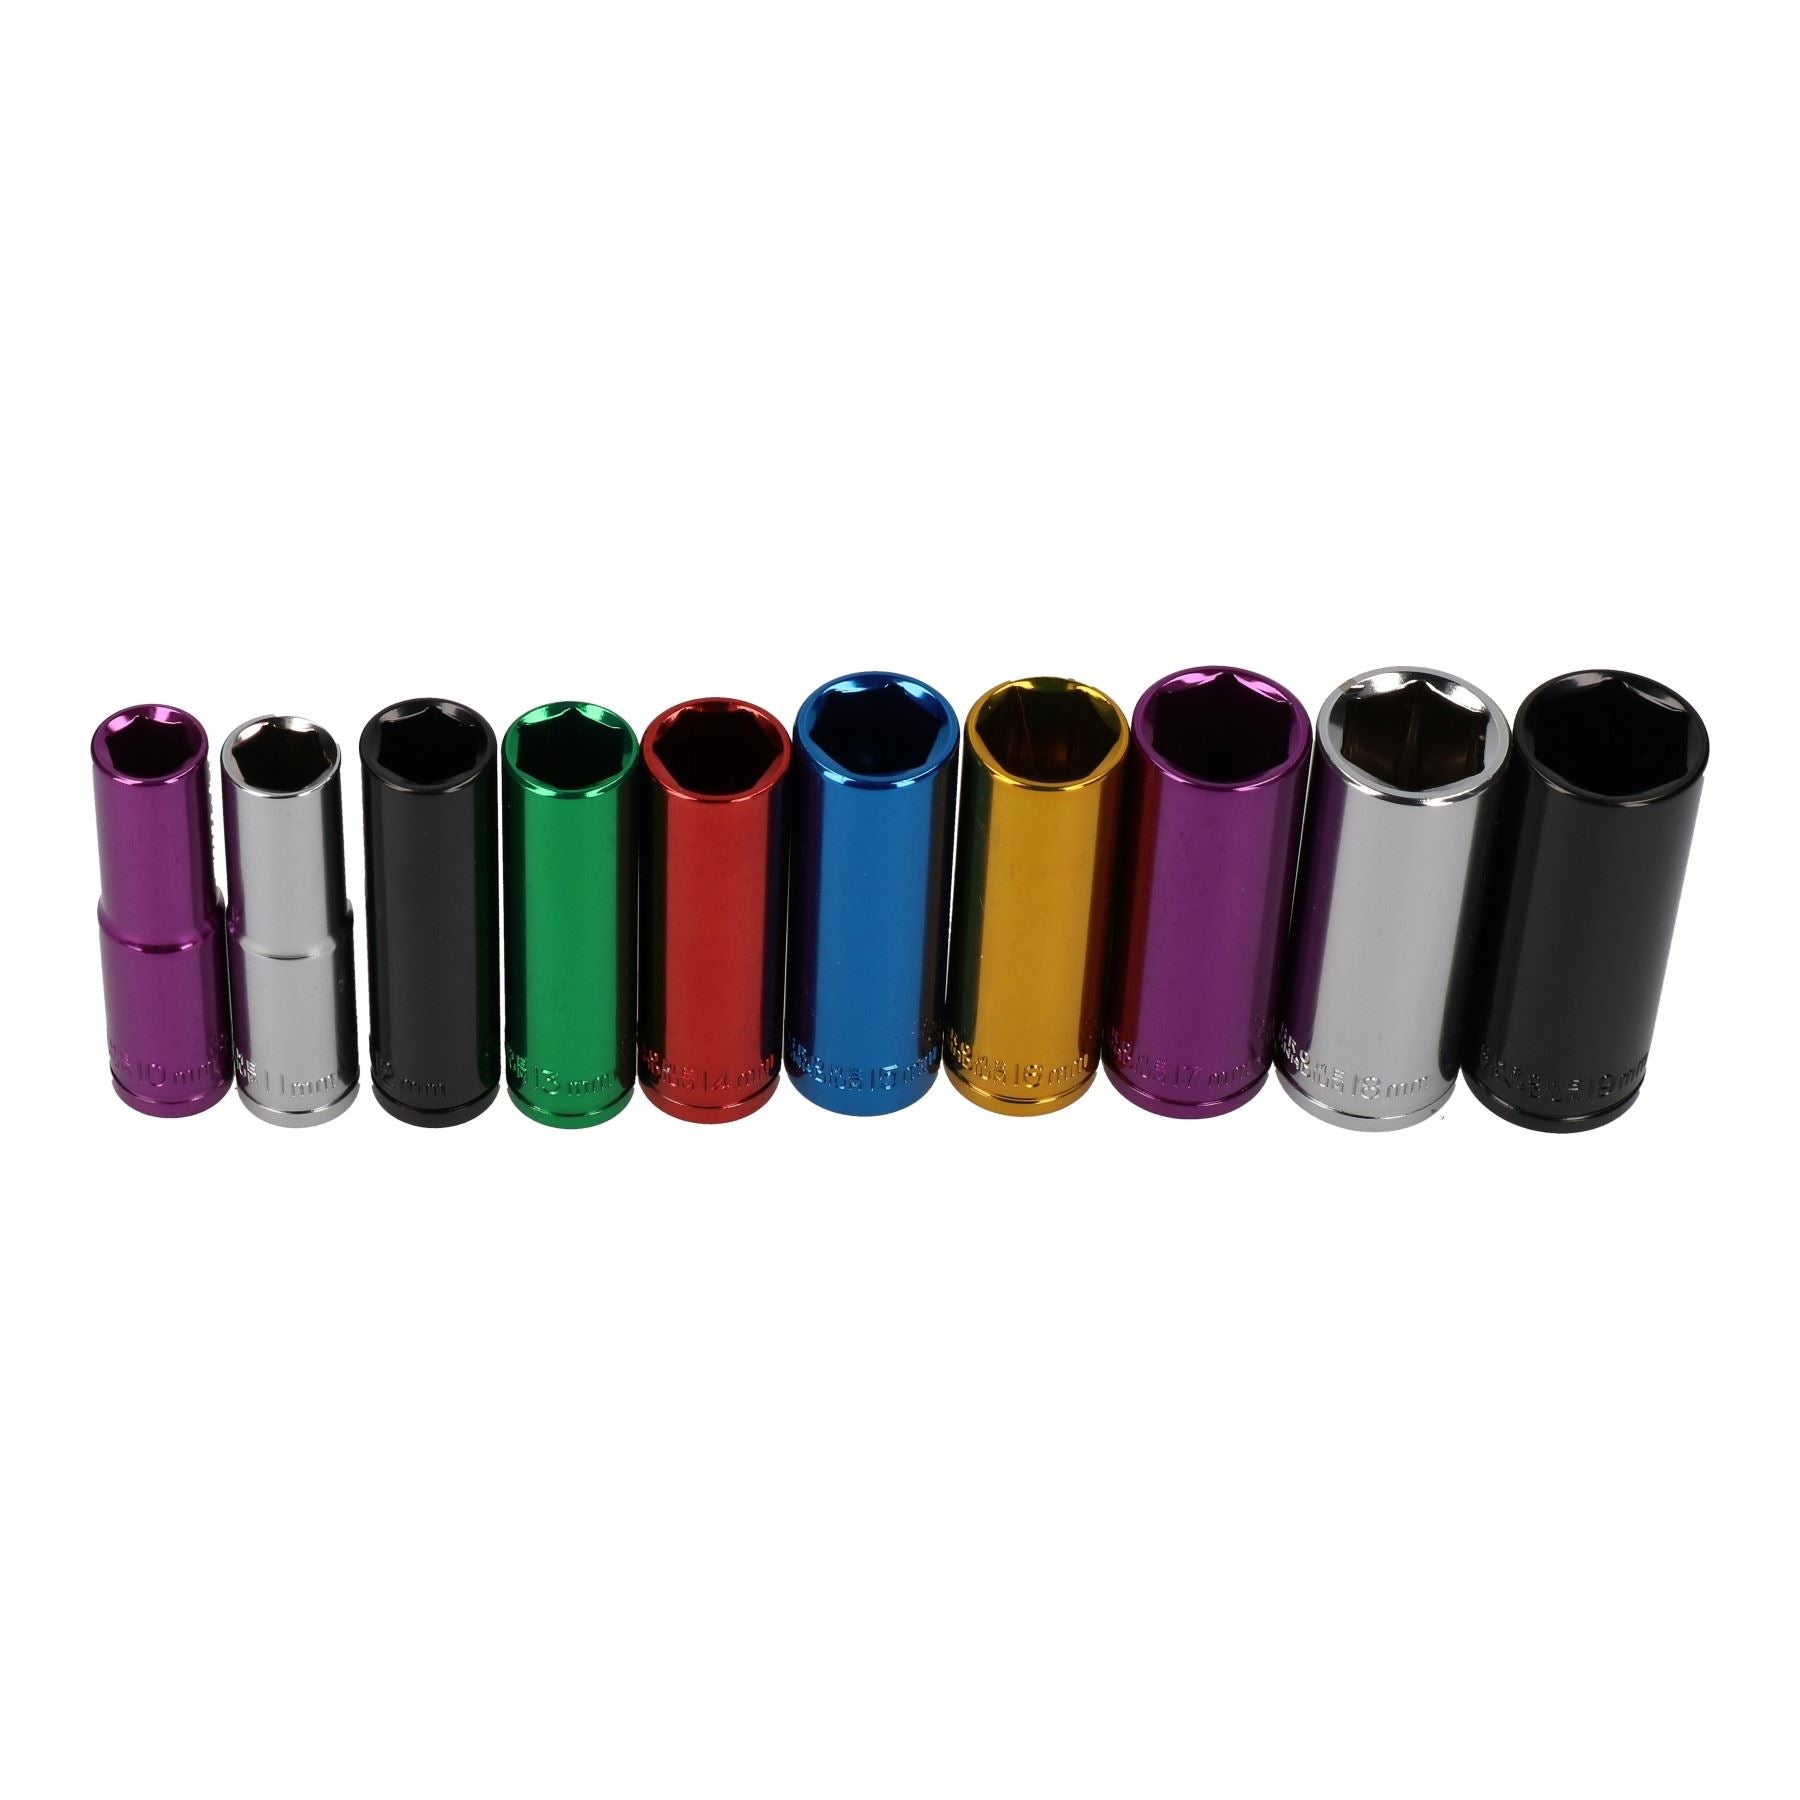 10pc Coloured 3/8" Dr Deep Sockets 6 Point Hex Metric 10 - 19mm With Rail